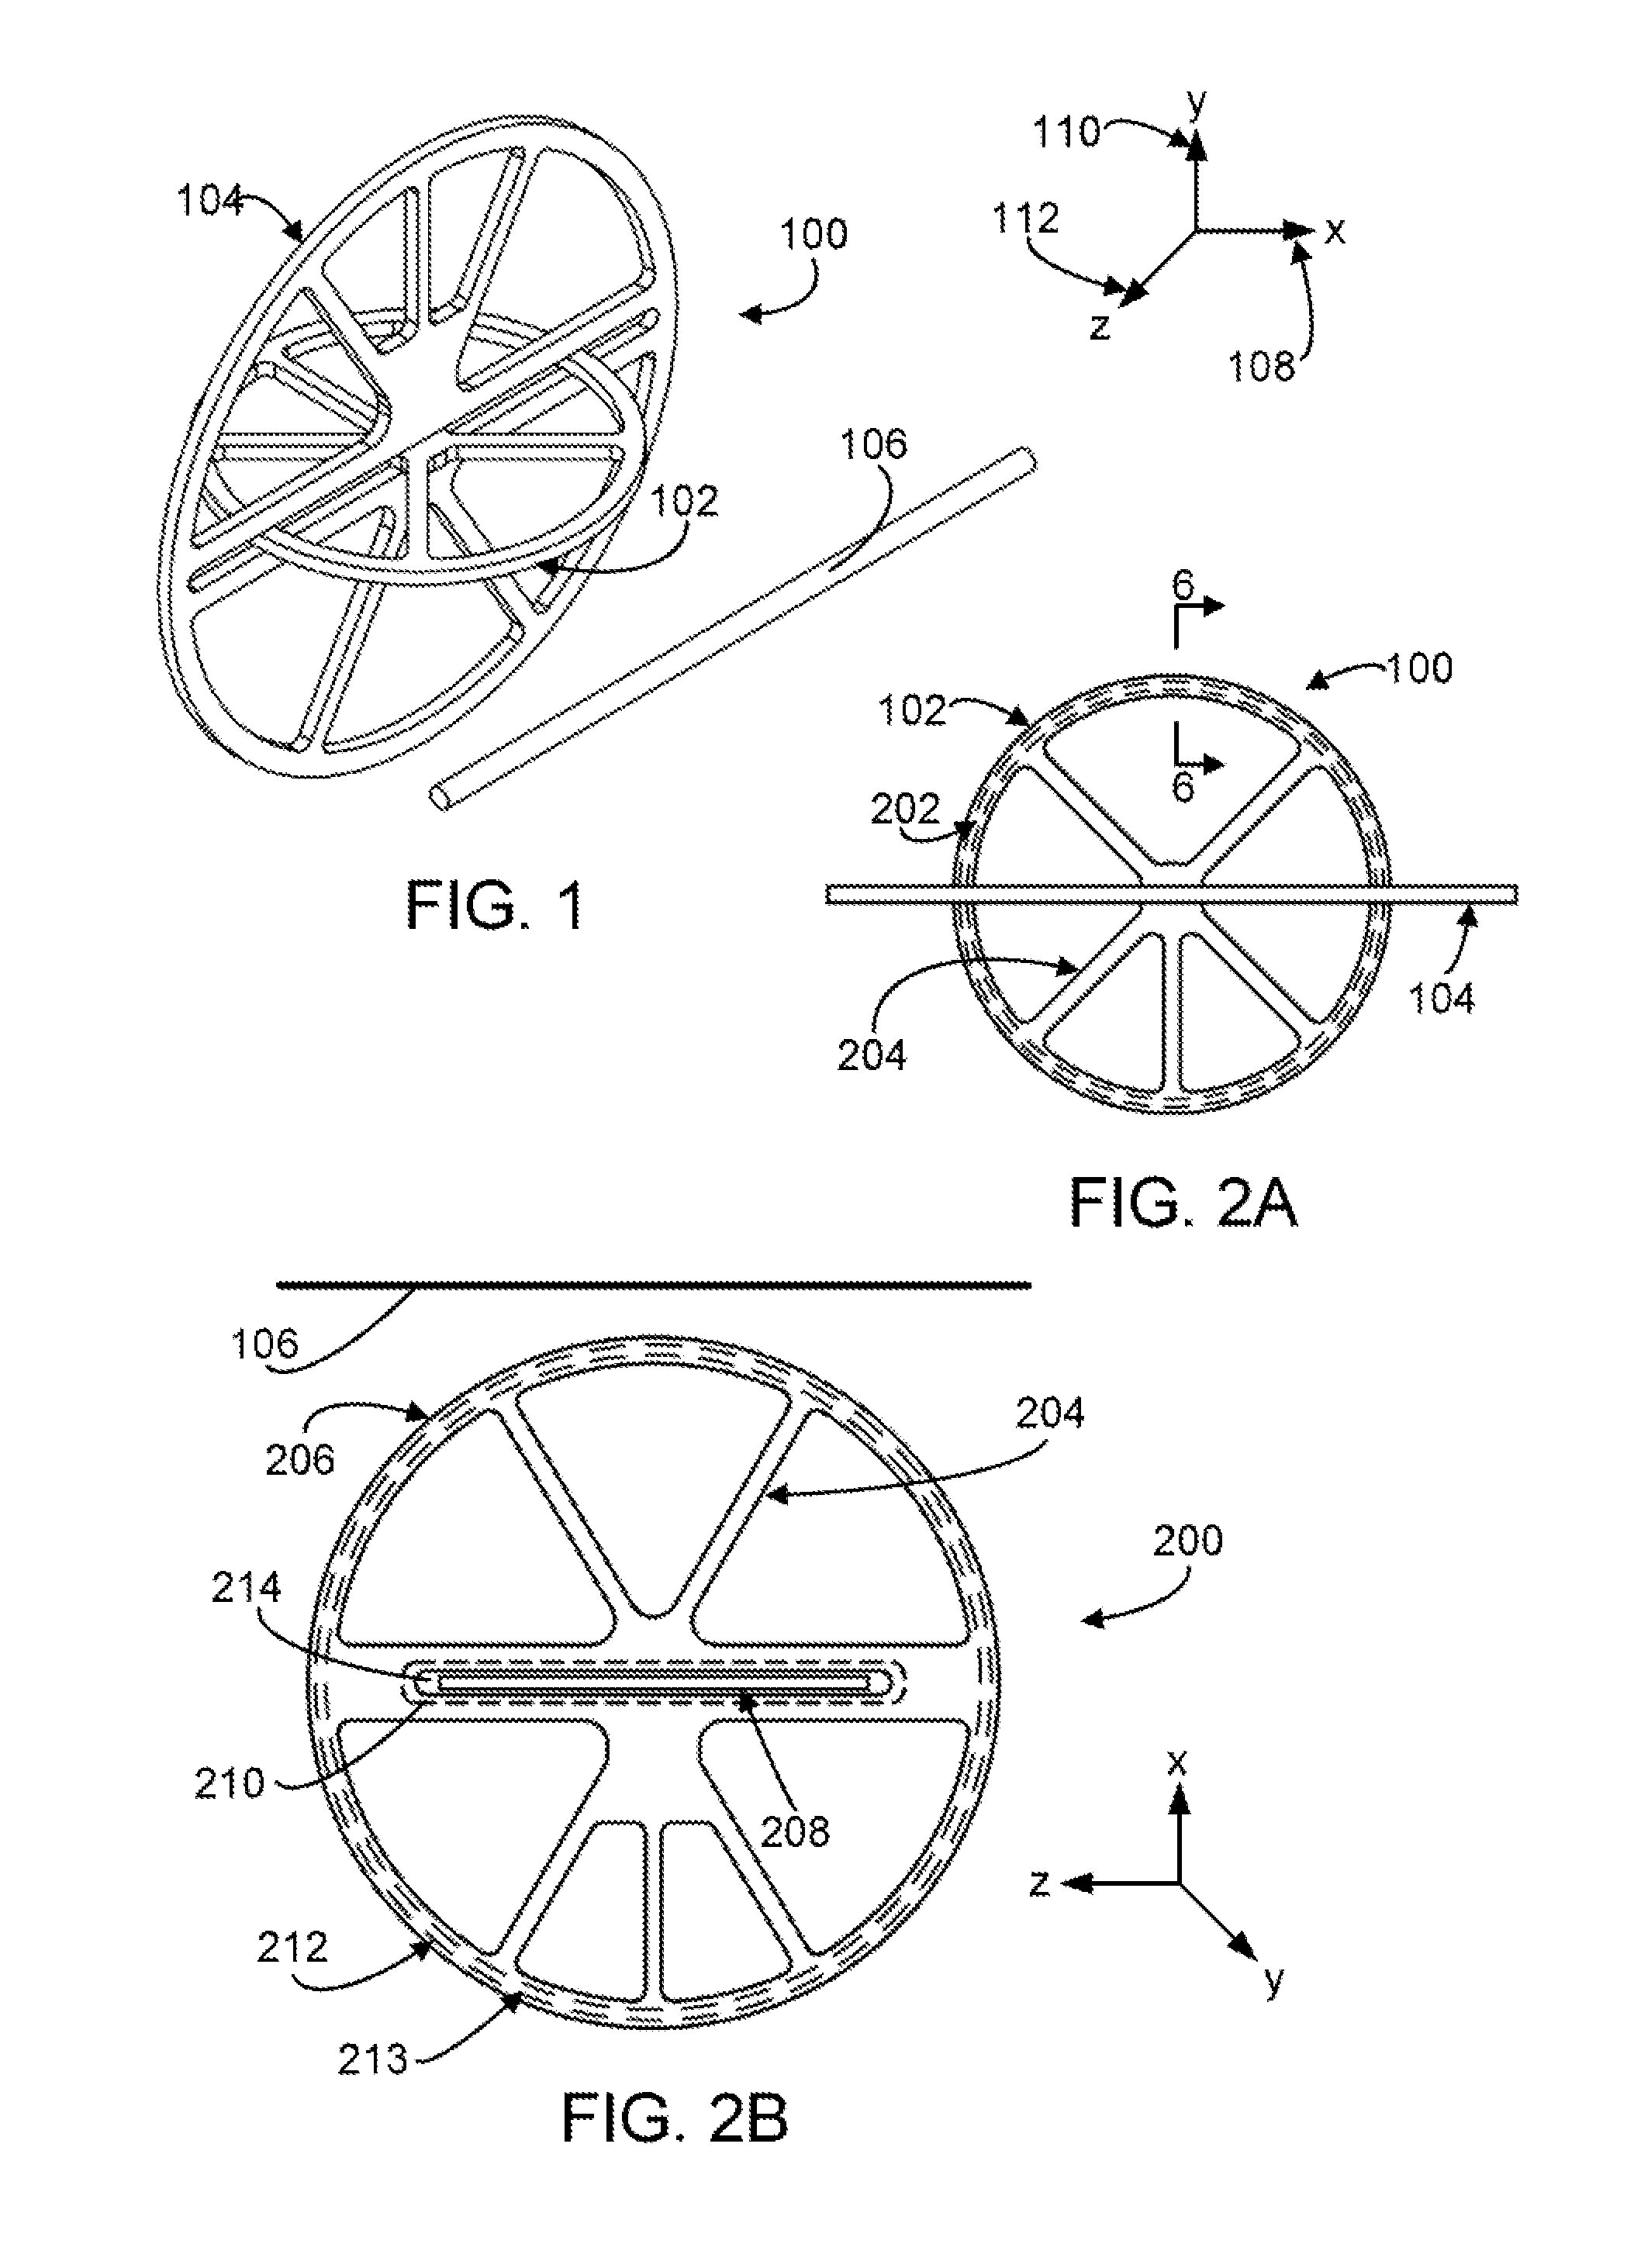 Search coil assembly and system for metal detection